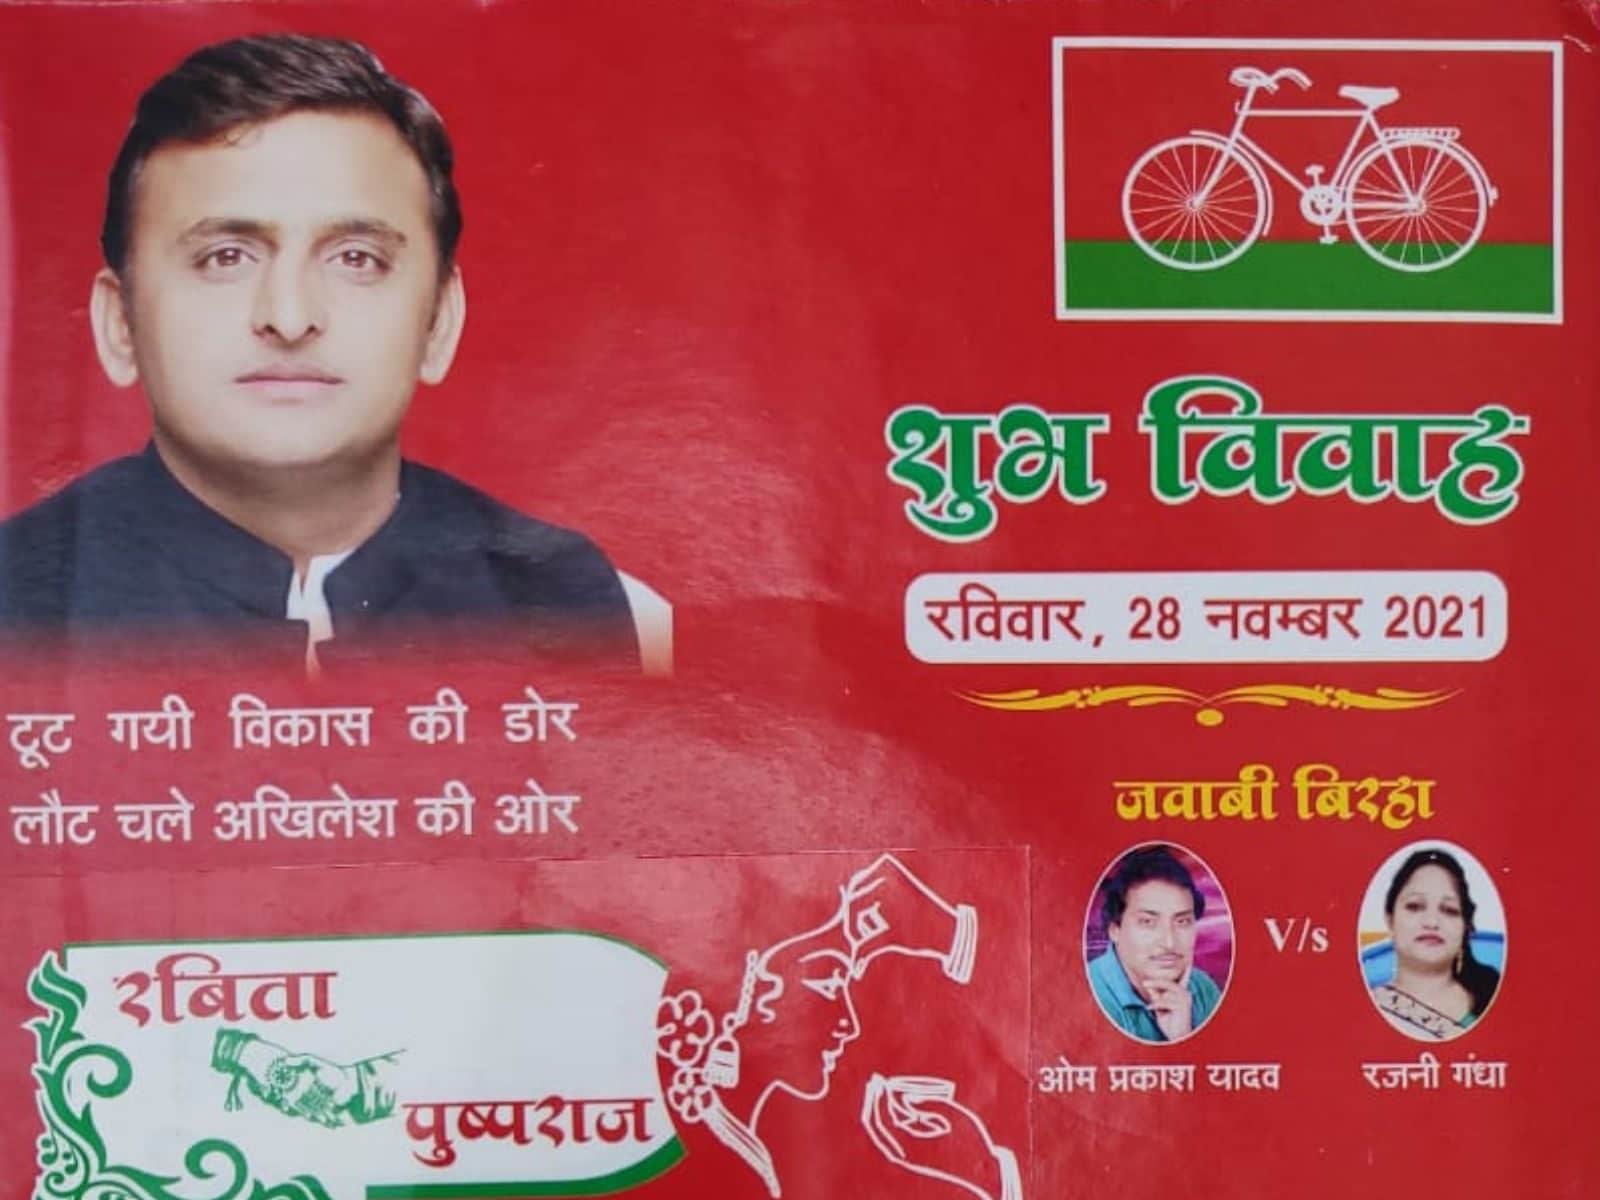 Samajwadi Party national convention at Lucknow on September 29, party  president to be elected